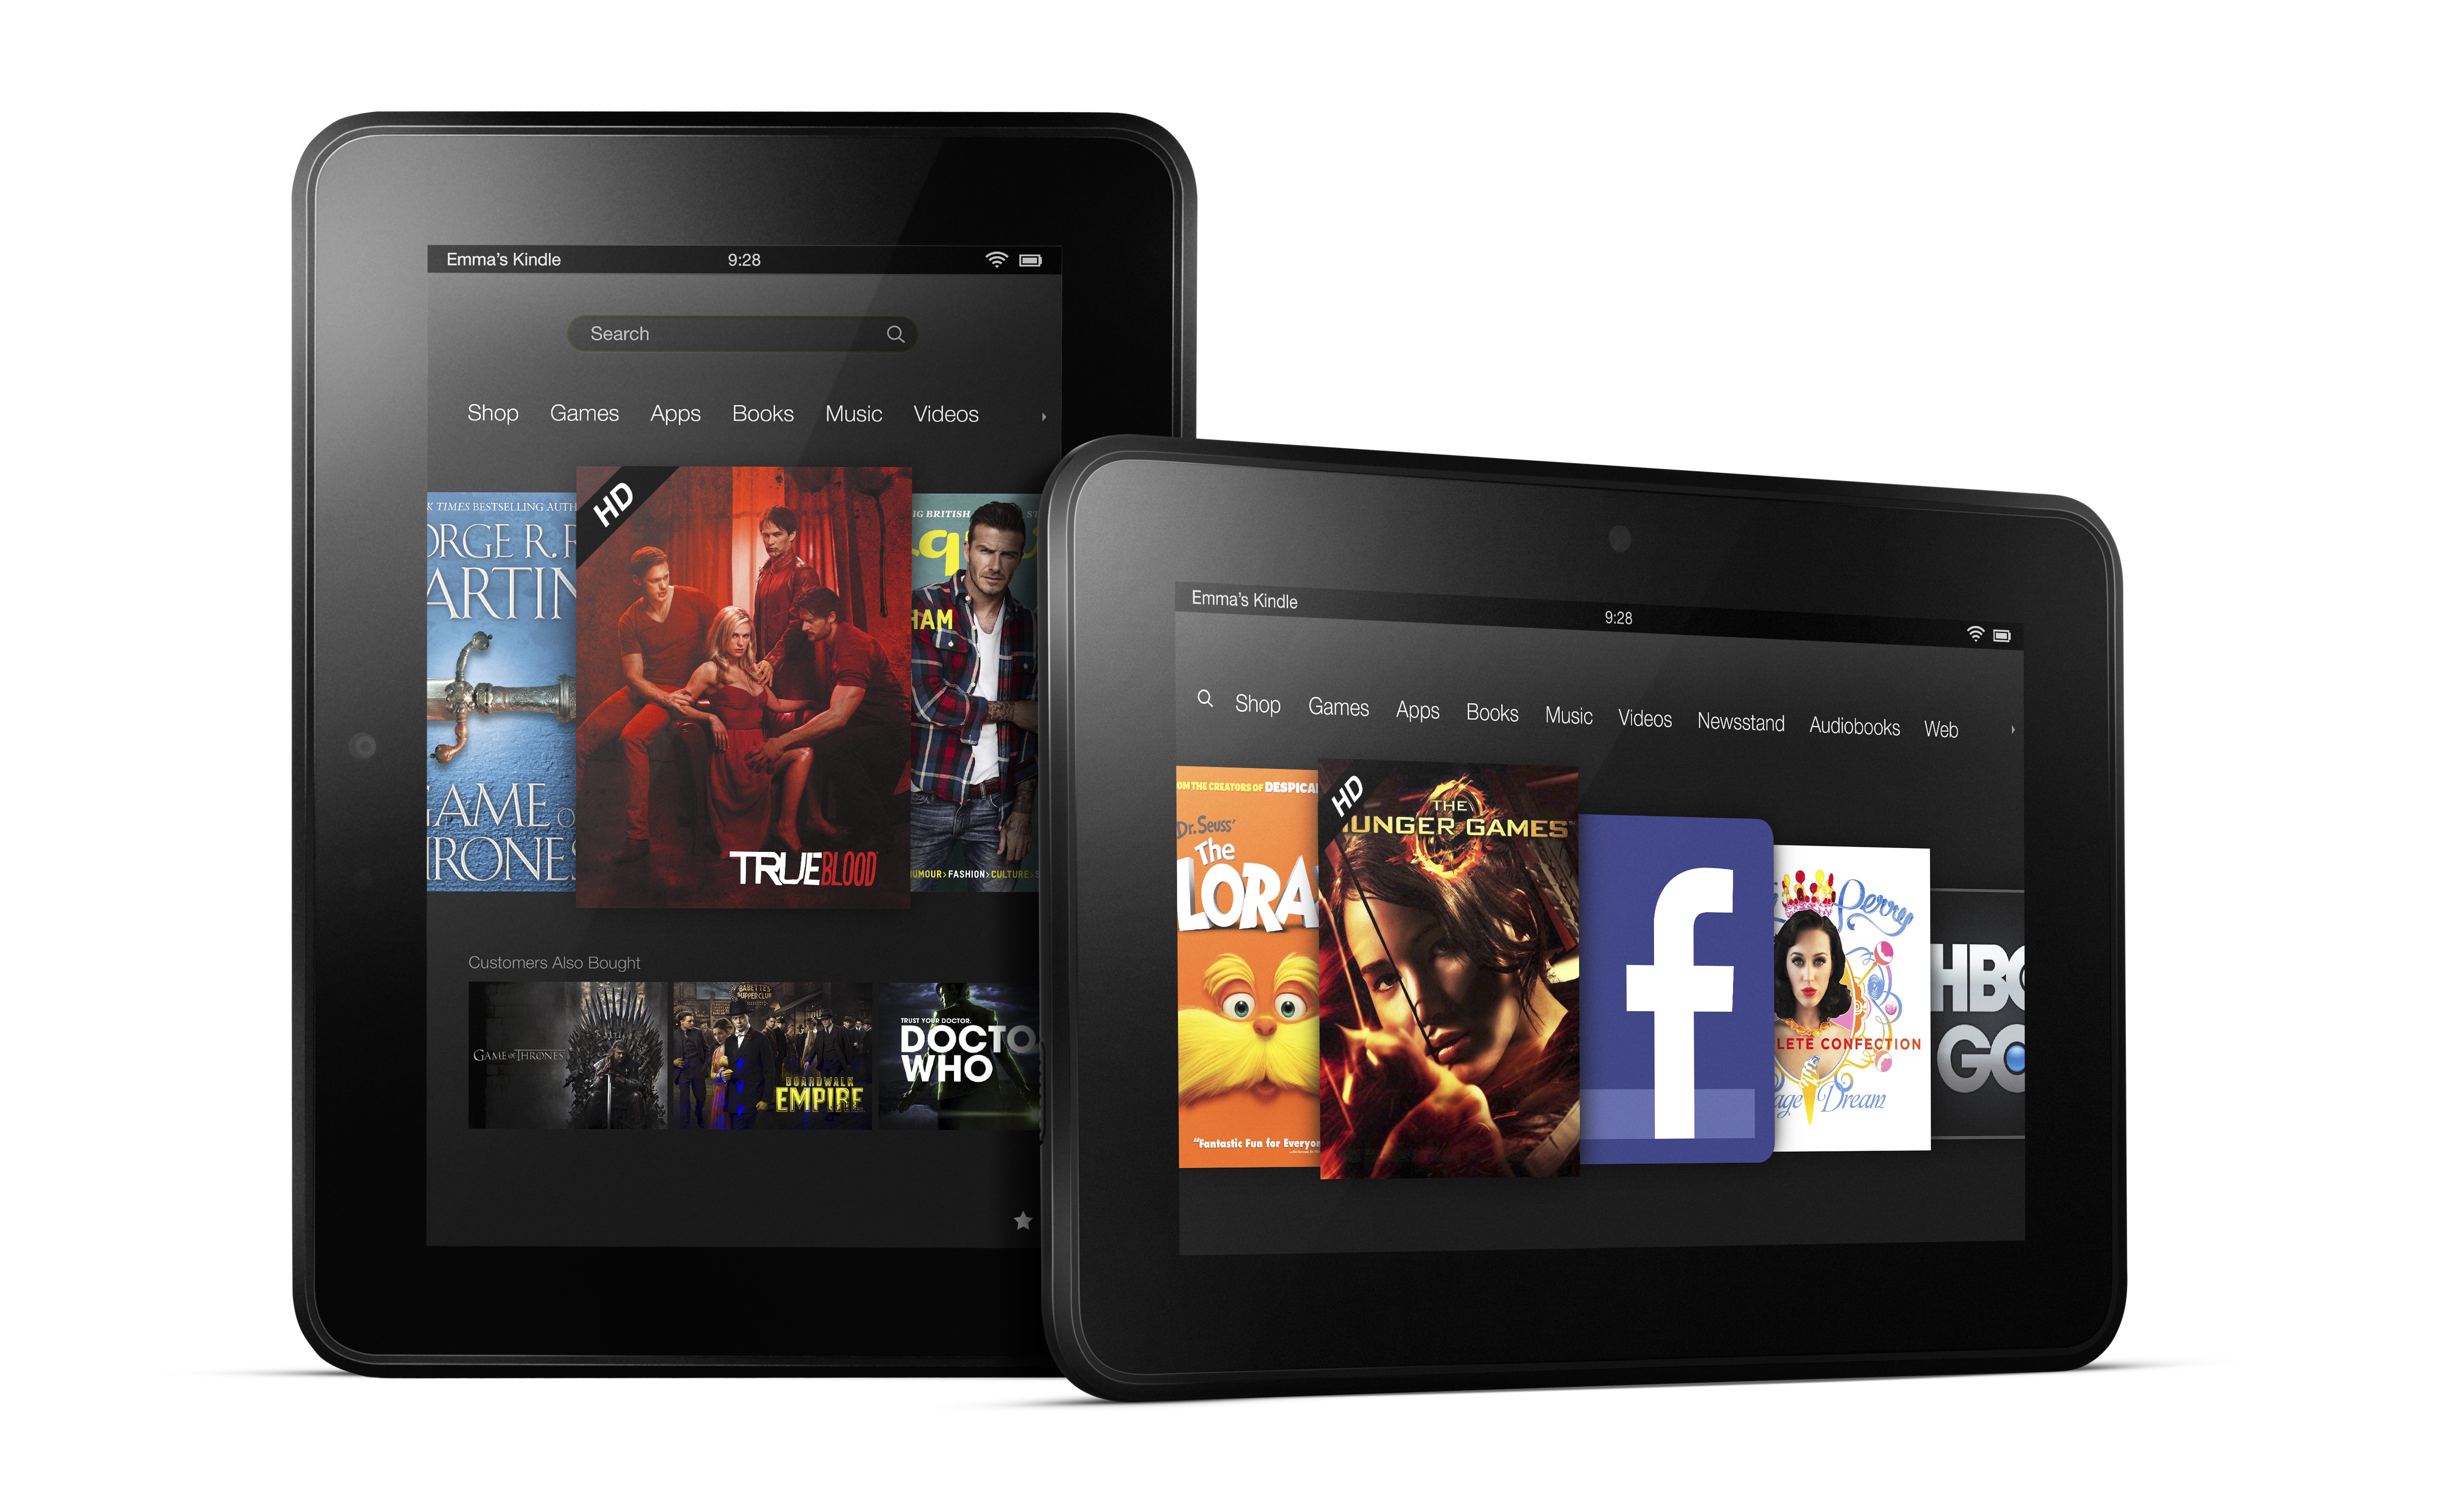 Kindle Fire HD Tablets Officially Announced 7 Or 8.9 HD Display